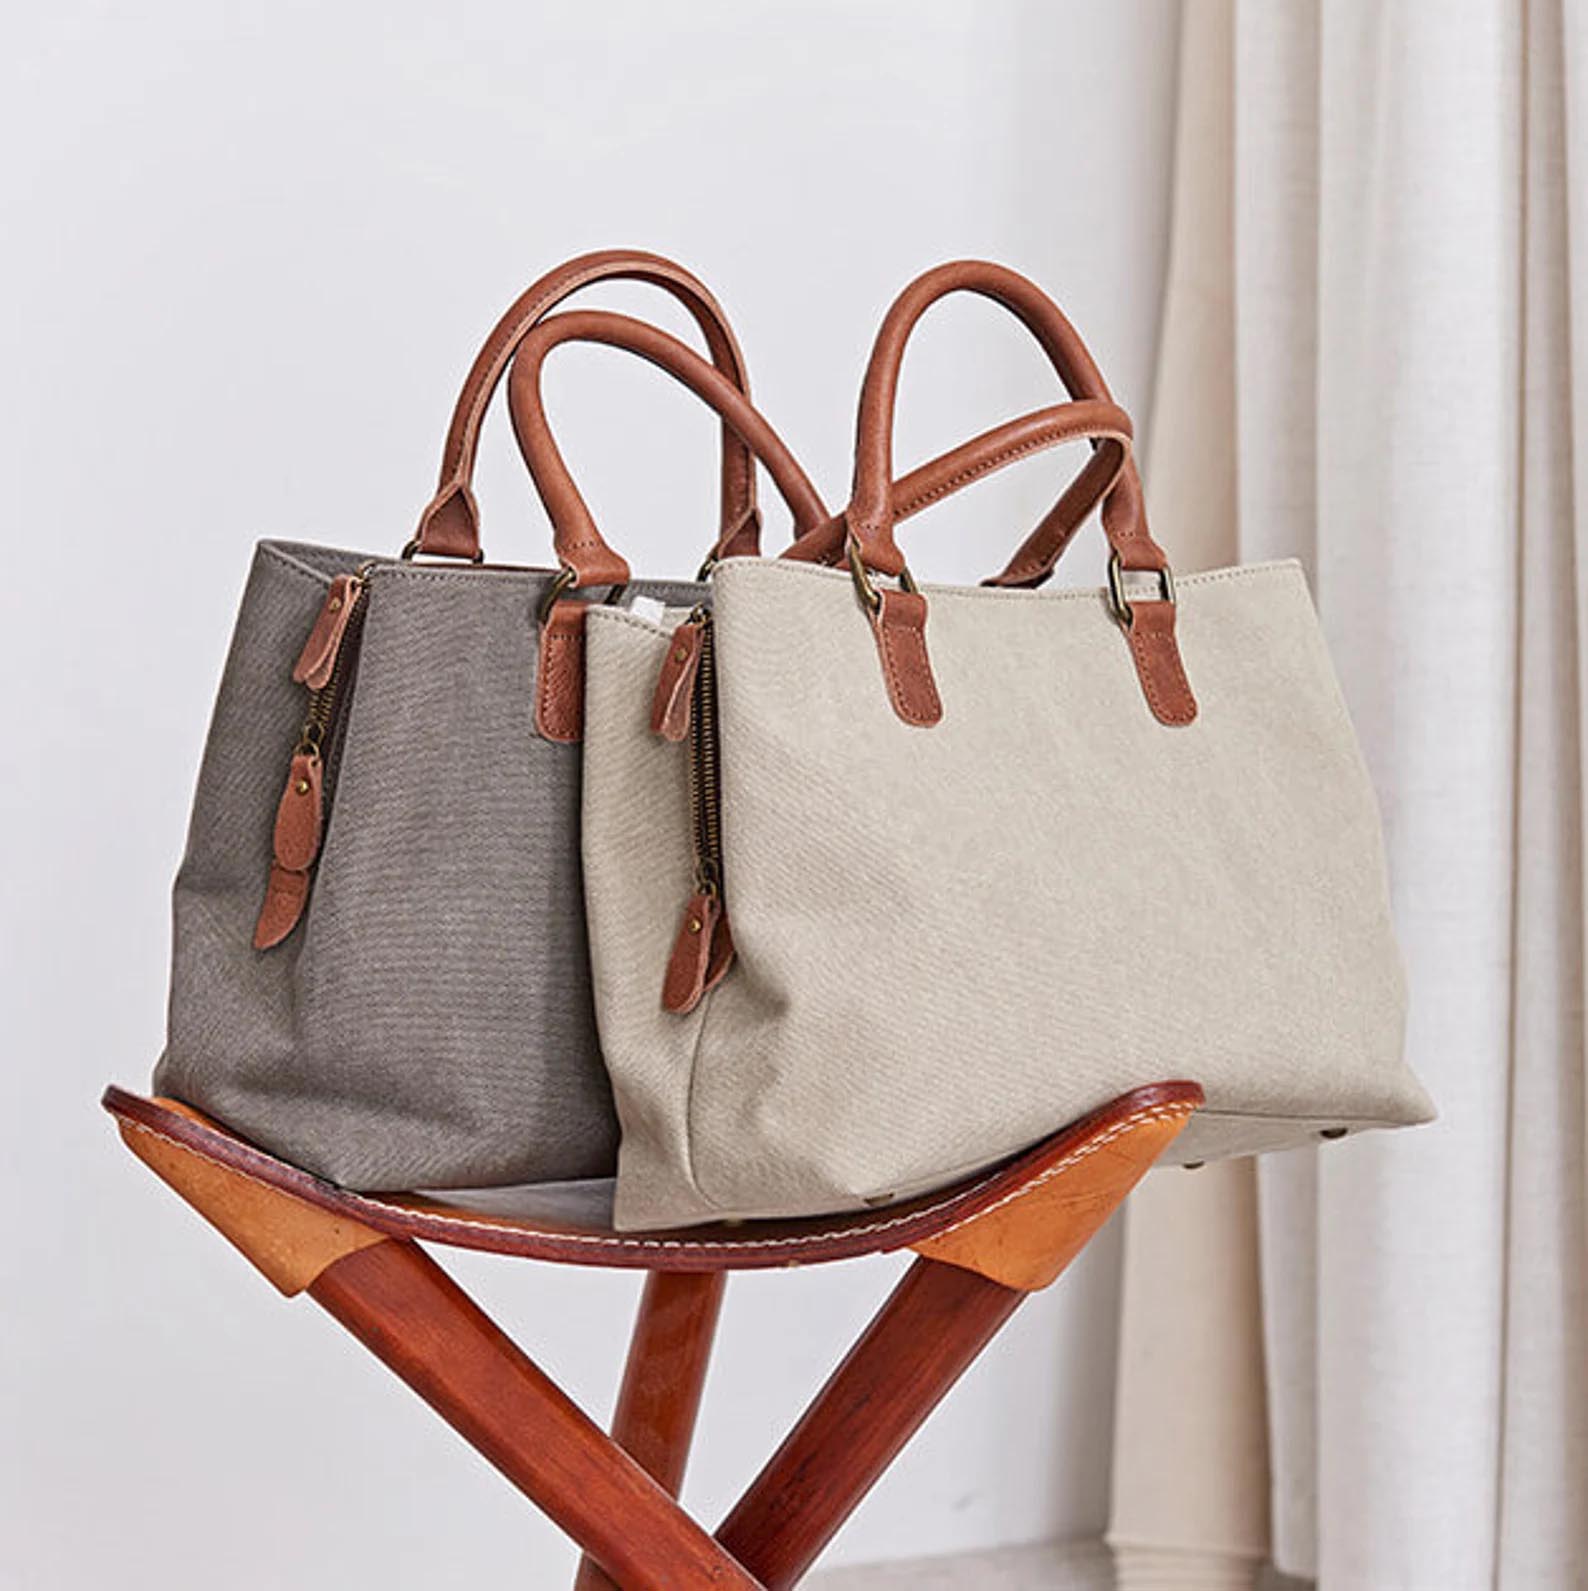 Modern Gift Ideas - Tote Bags.